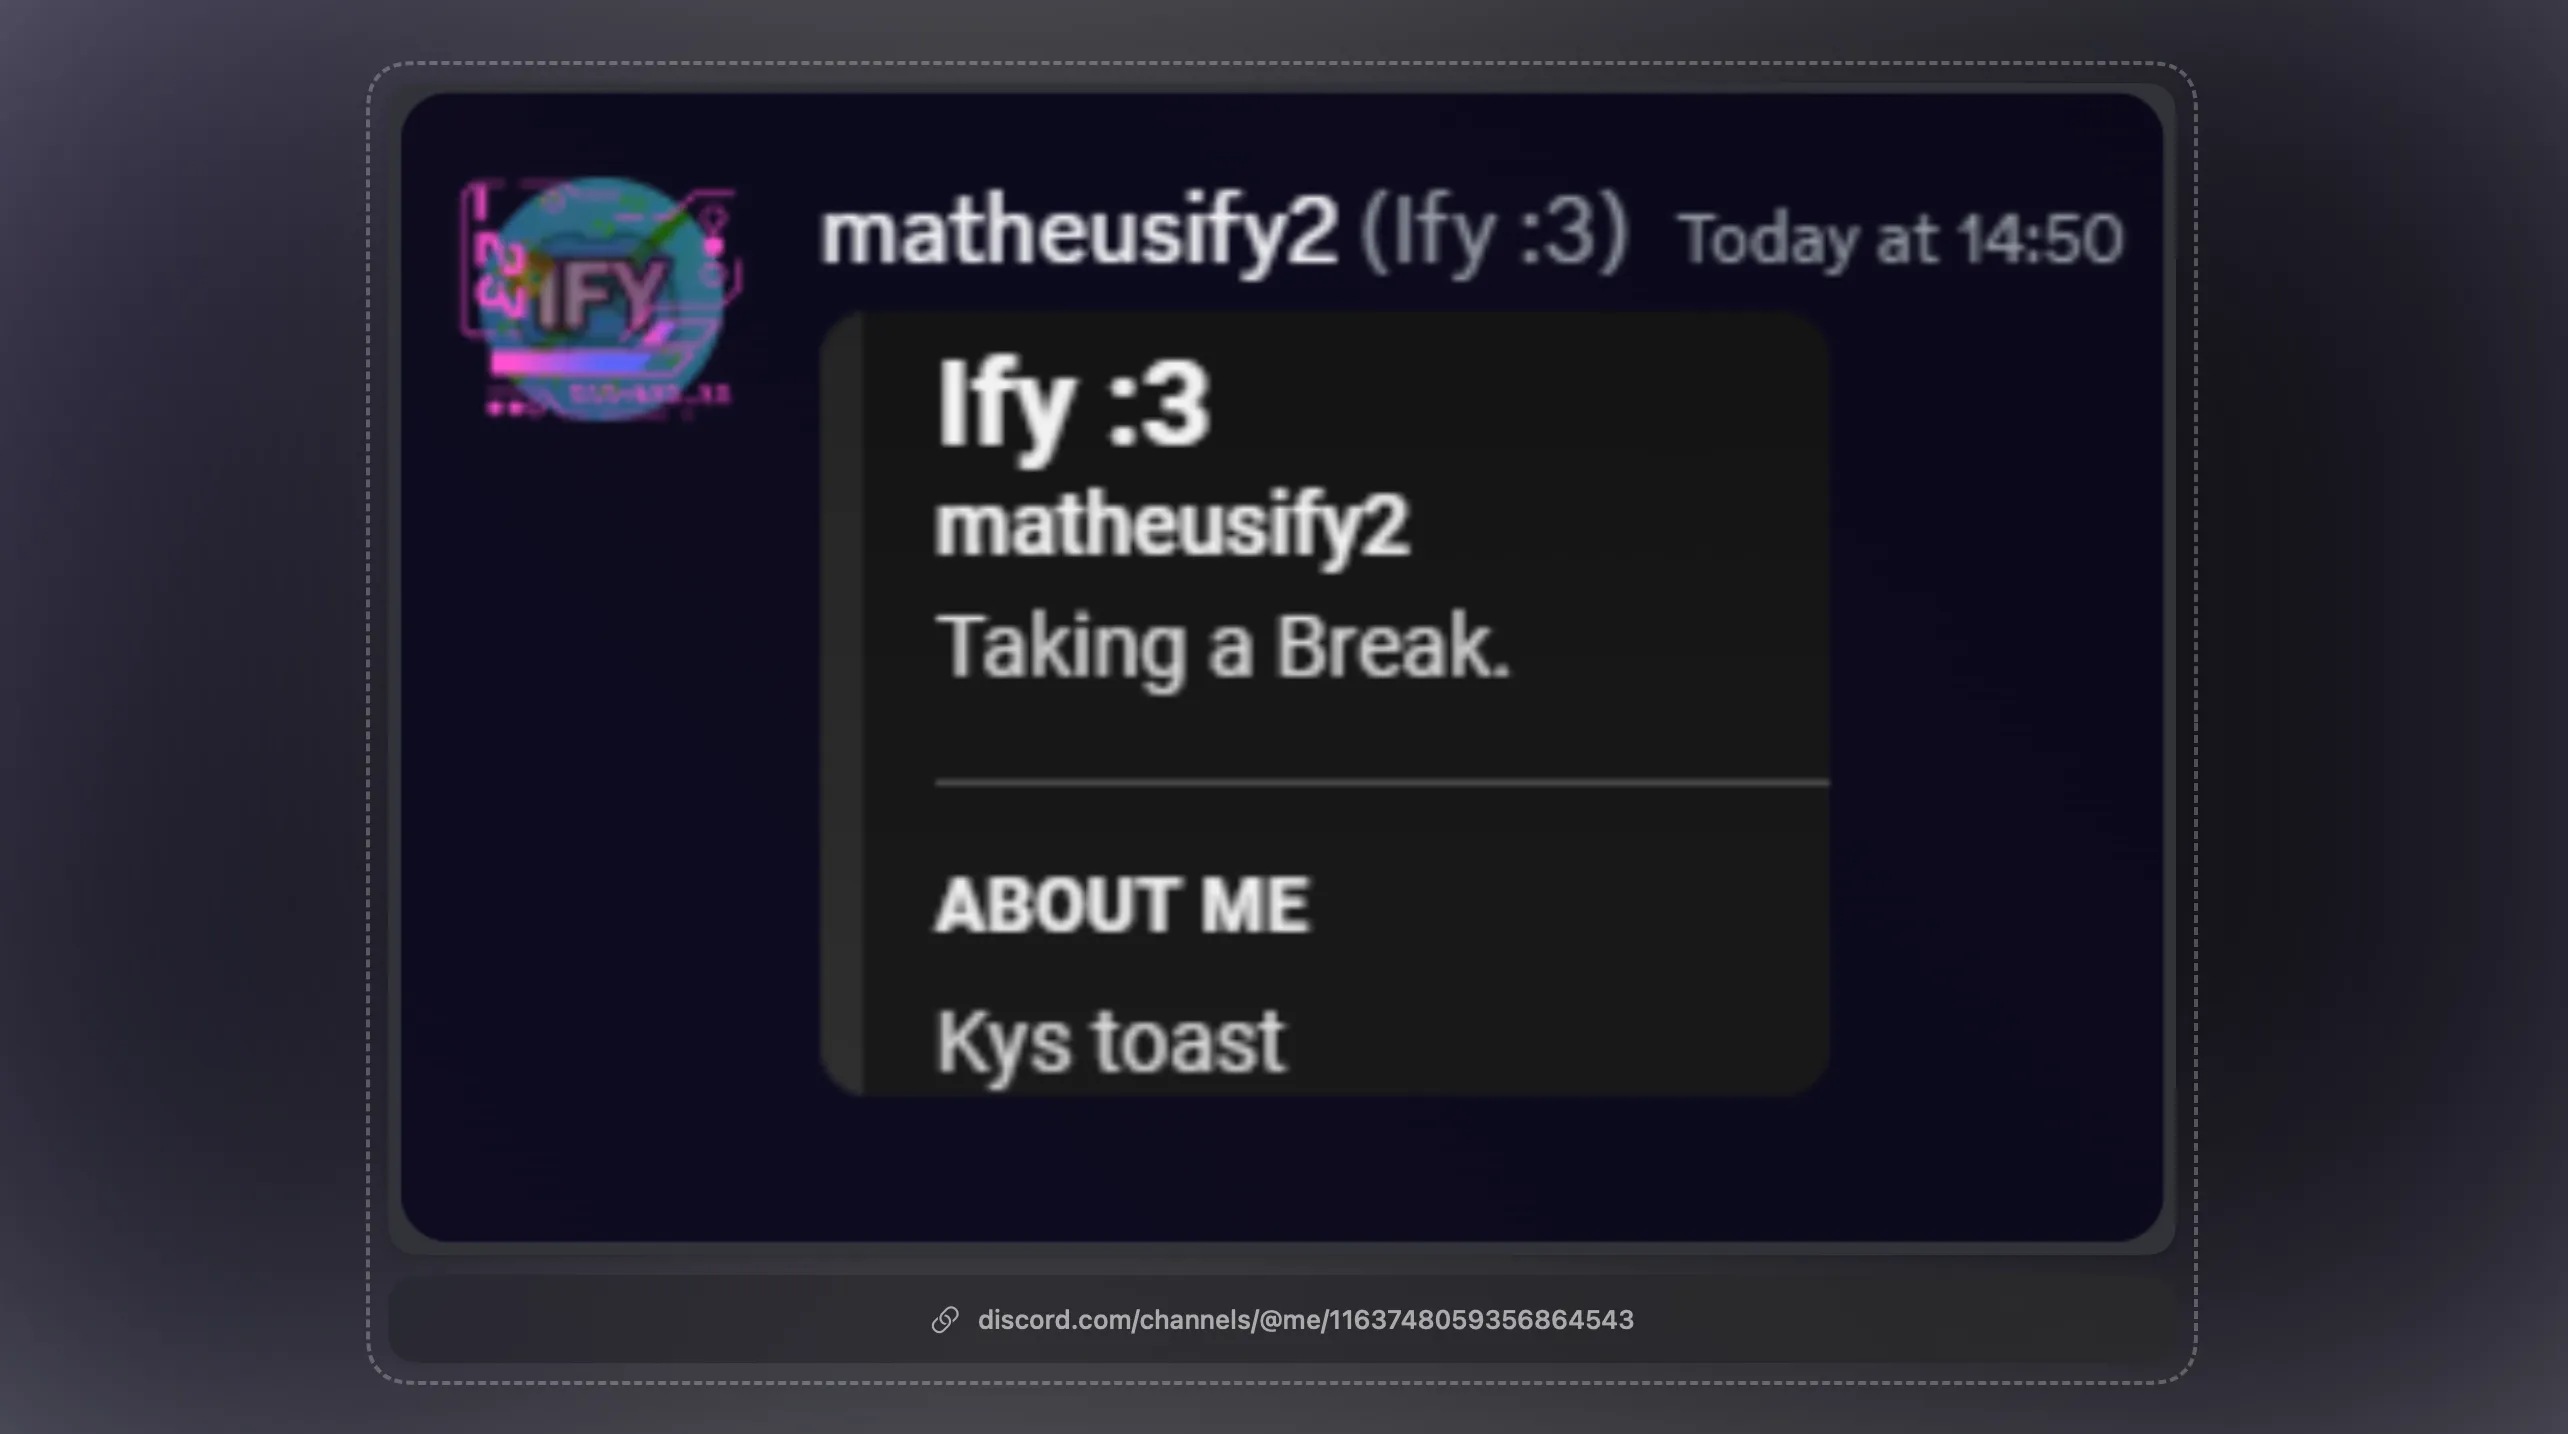 Matheus&#x27; profile, showing his about me that says "Kys toast"